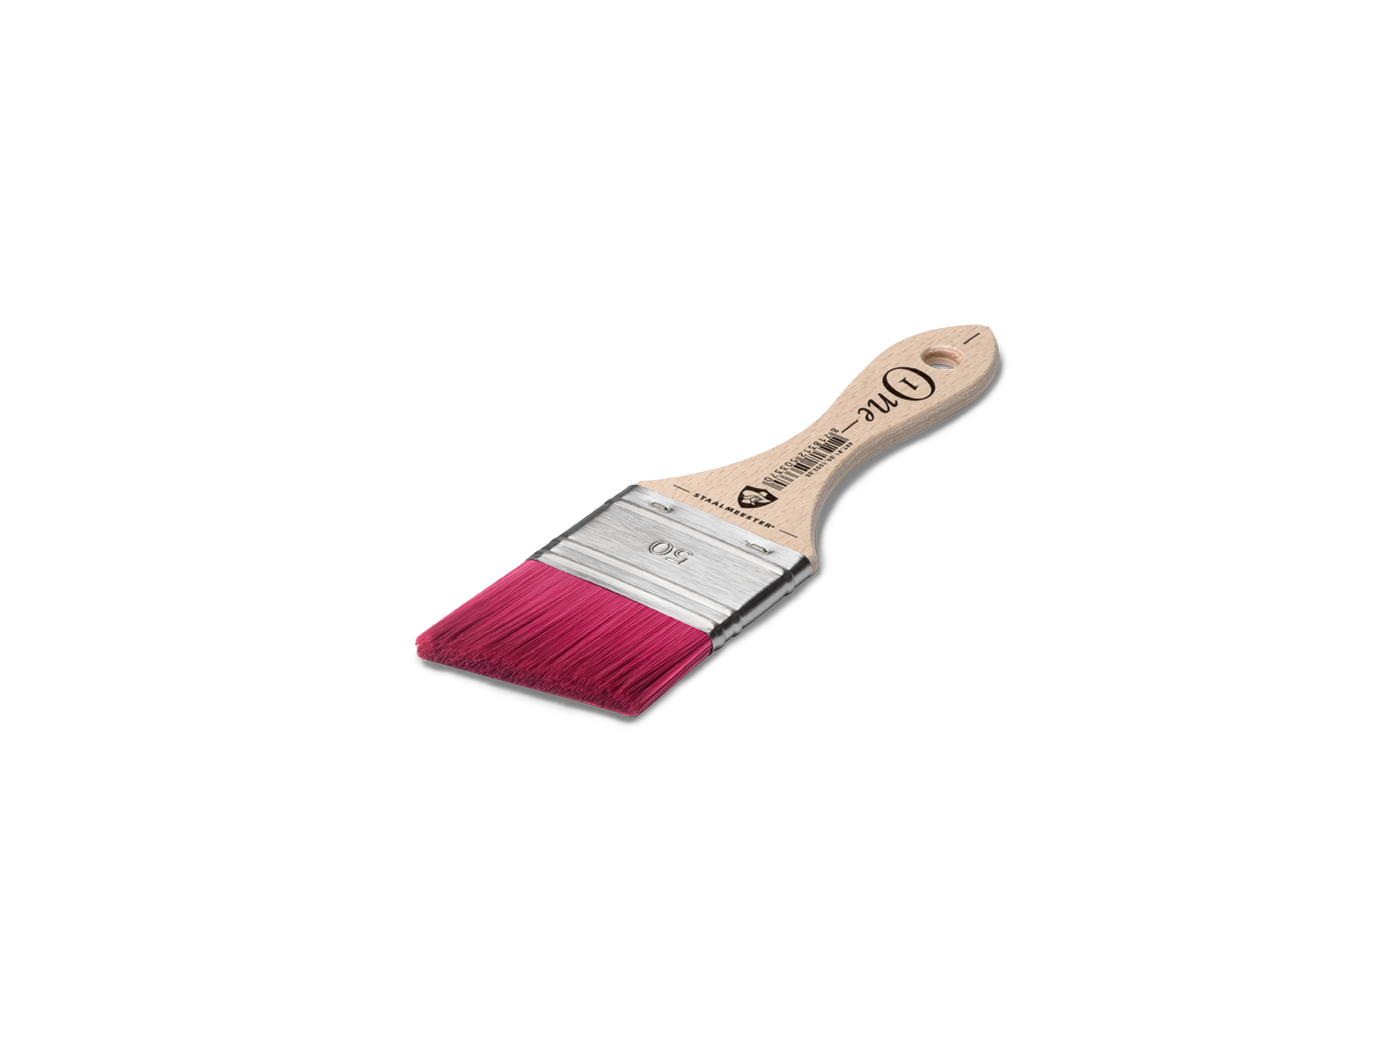 Staalmeester One Series - Fab 08 - Fine Flat Paint Brush #18 (1.09.1090.18)